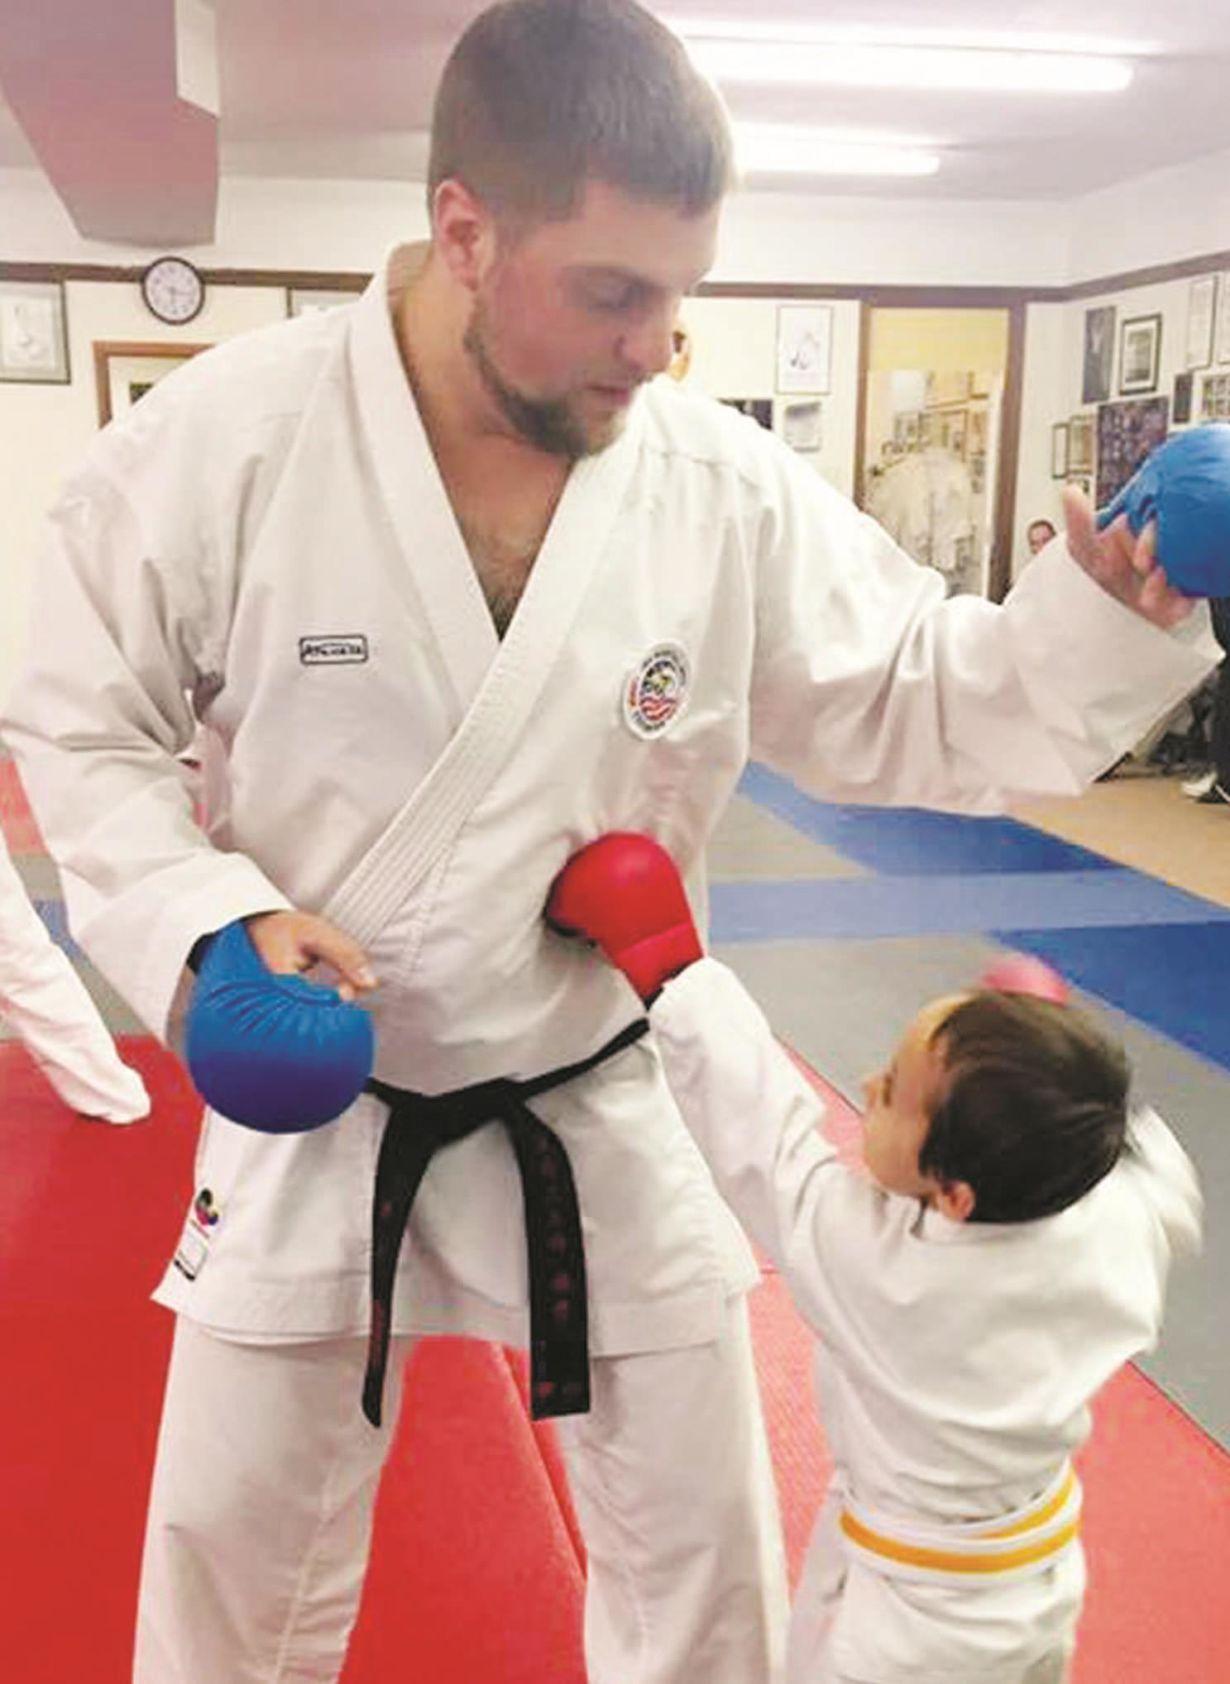 USA Martial Arts Training Centers are West Virginia's